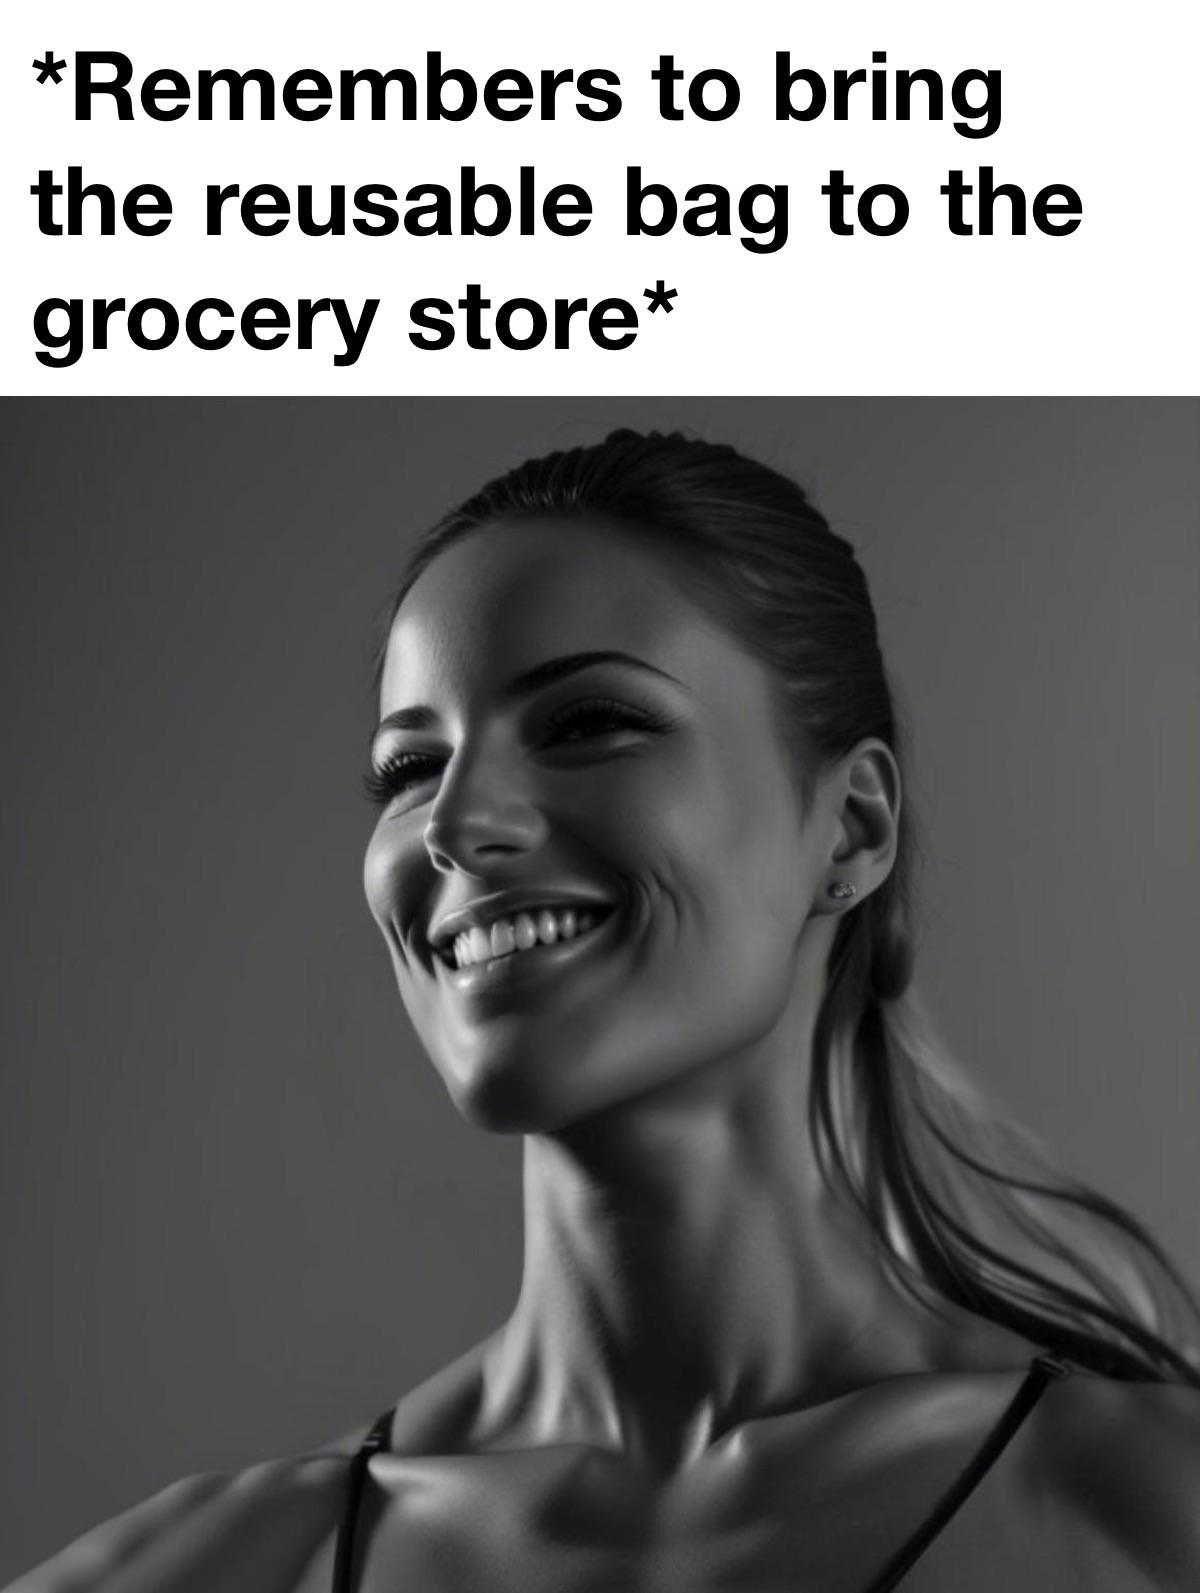 funny memes and pics - beauty - Remembers to bring the reusable bag to the grocery store